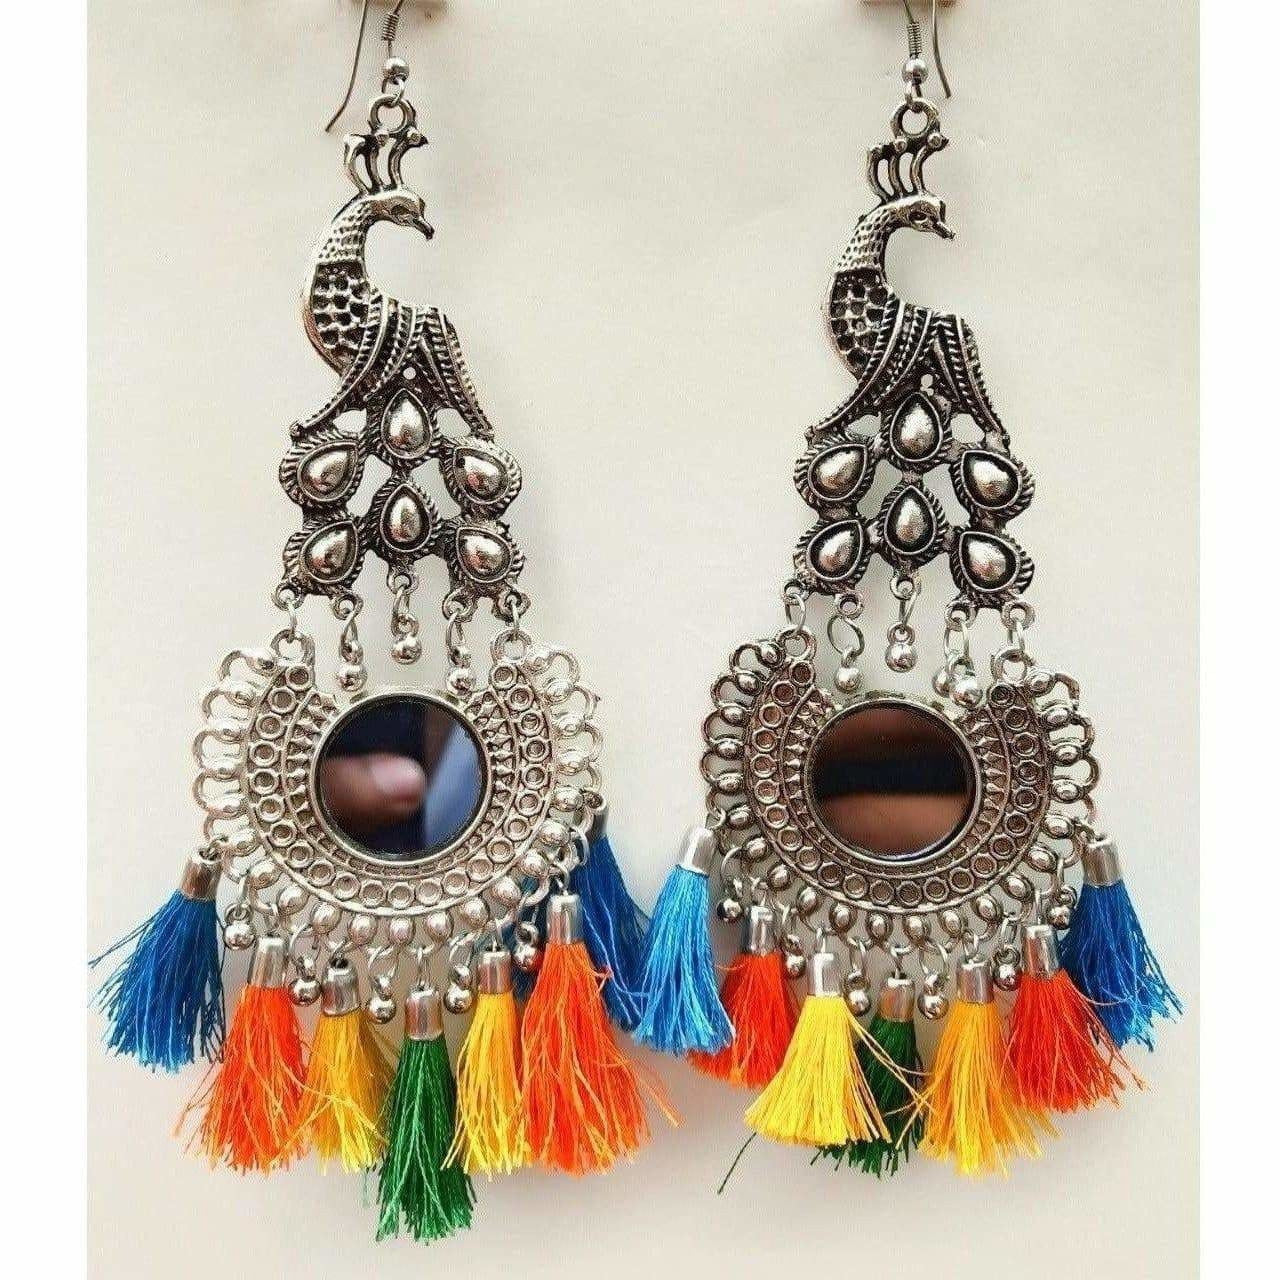 Nazia Hand-embroidered Mirror Earrings – Krafted with Happiness